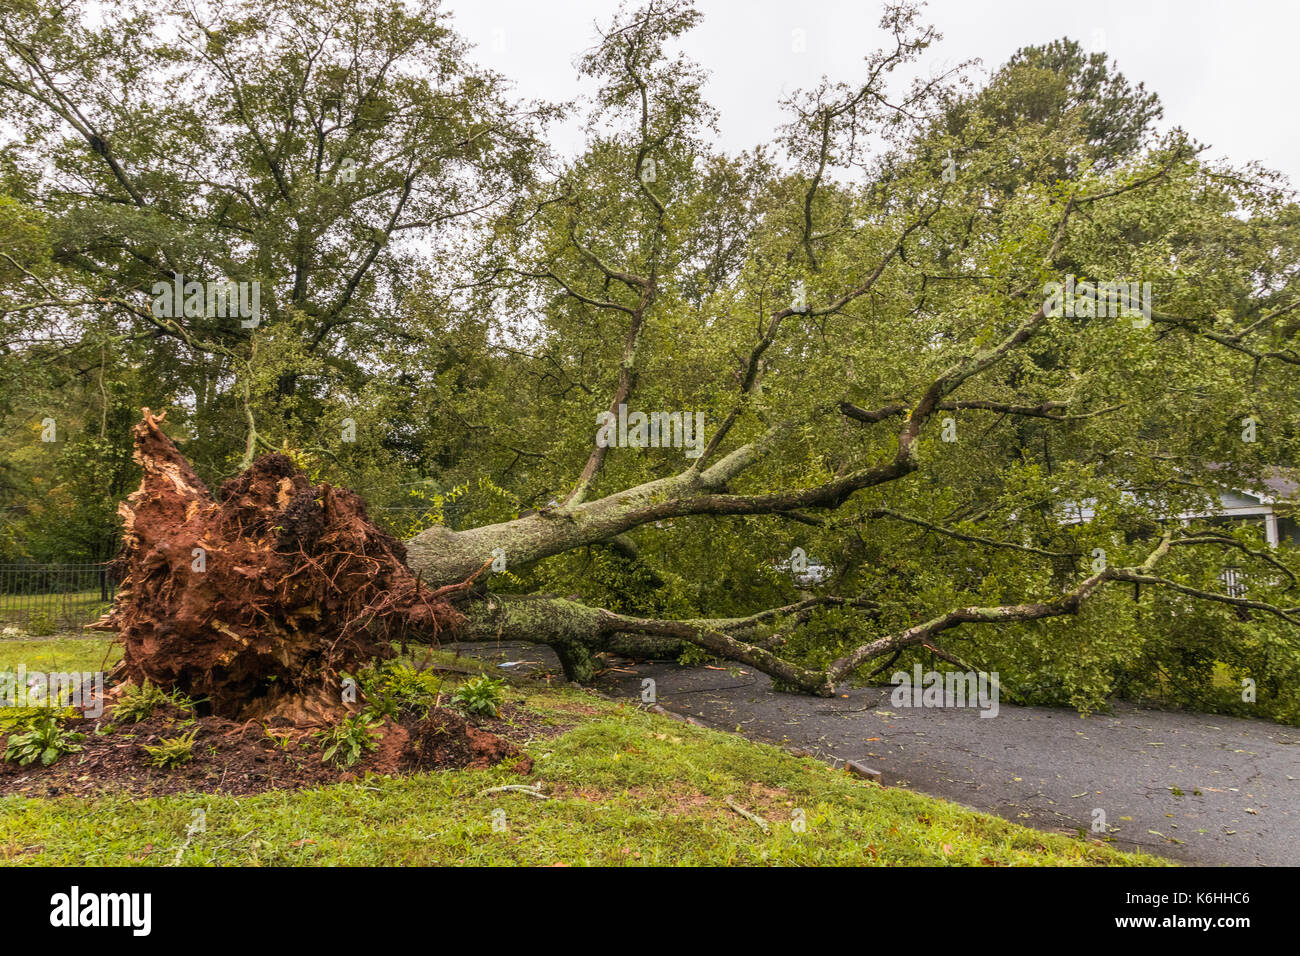 Horizontal photo of fallen tree in a street after Tropical Storm Irma Stock Photo